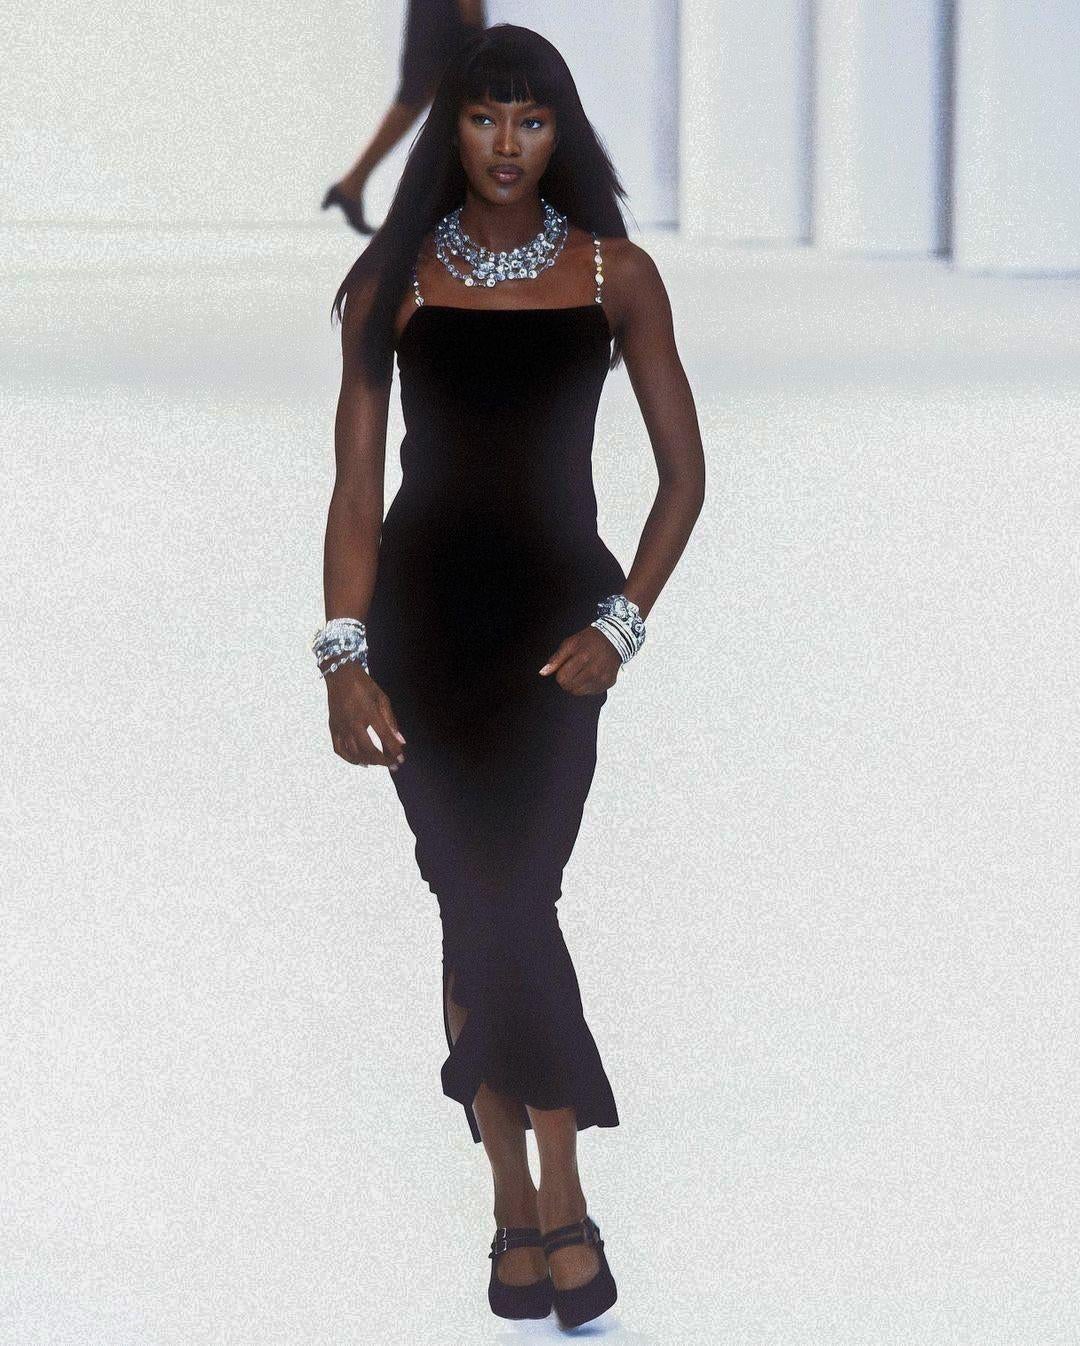 Meet this exquisite vintage Chanel dress from the iconic Spring/Summer 1998 collection, famously worn by the stunning Naomi Campbell. Crafted from luxurious black wool crepe, its silhouette is defined by silver tone chain straps adorned with